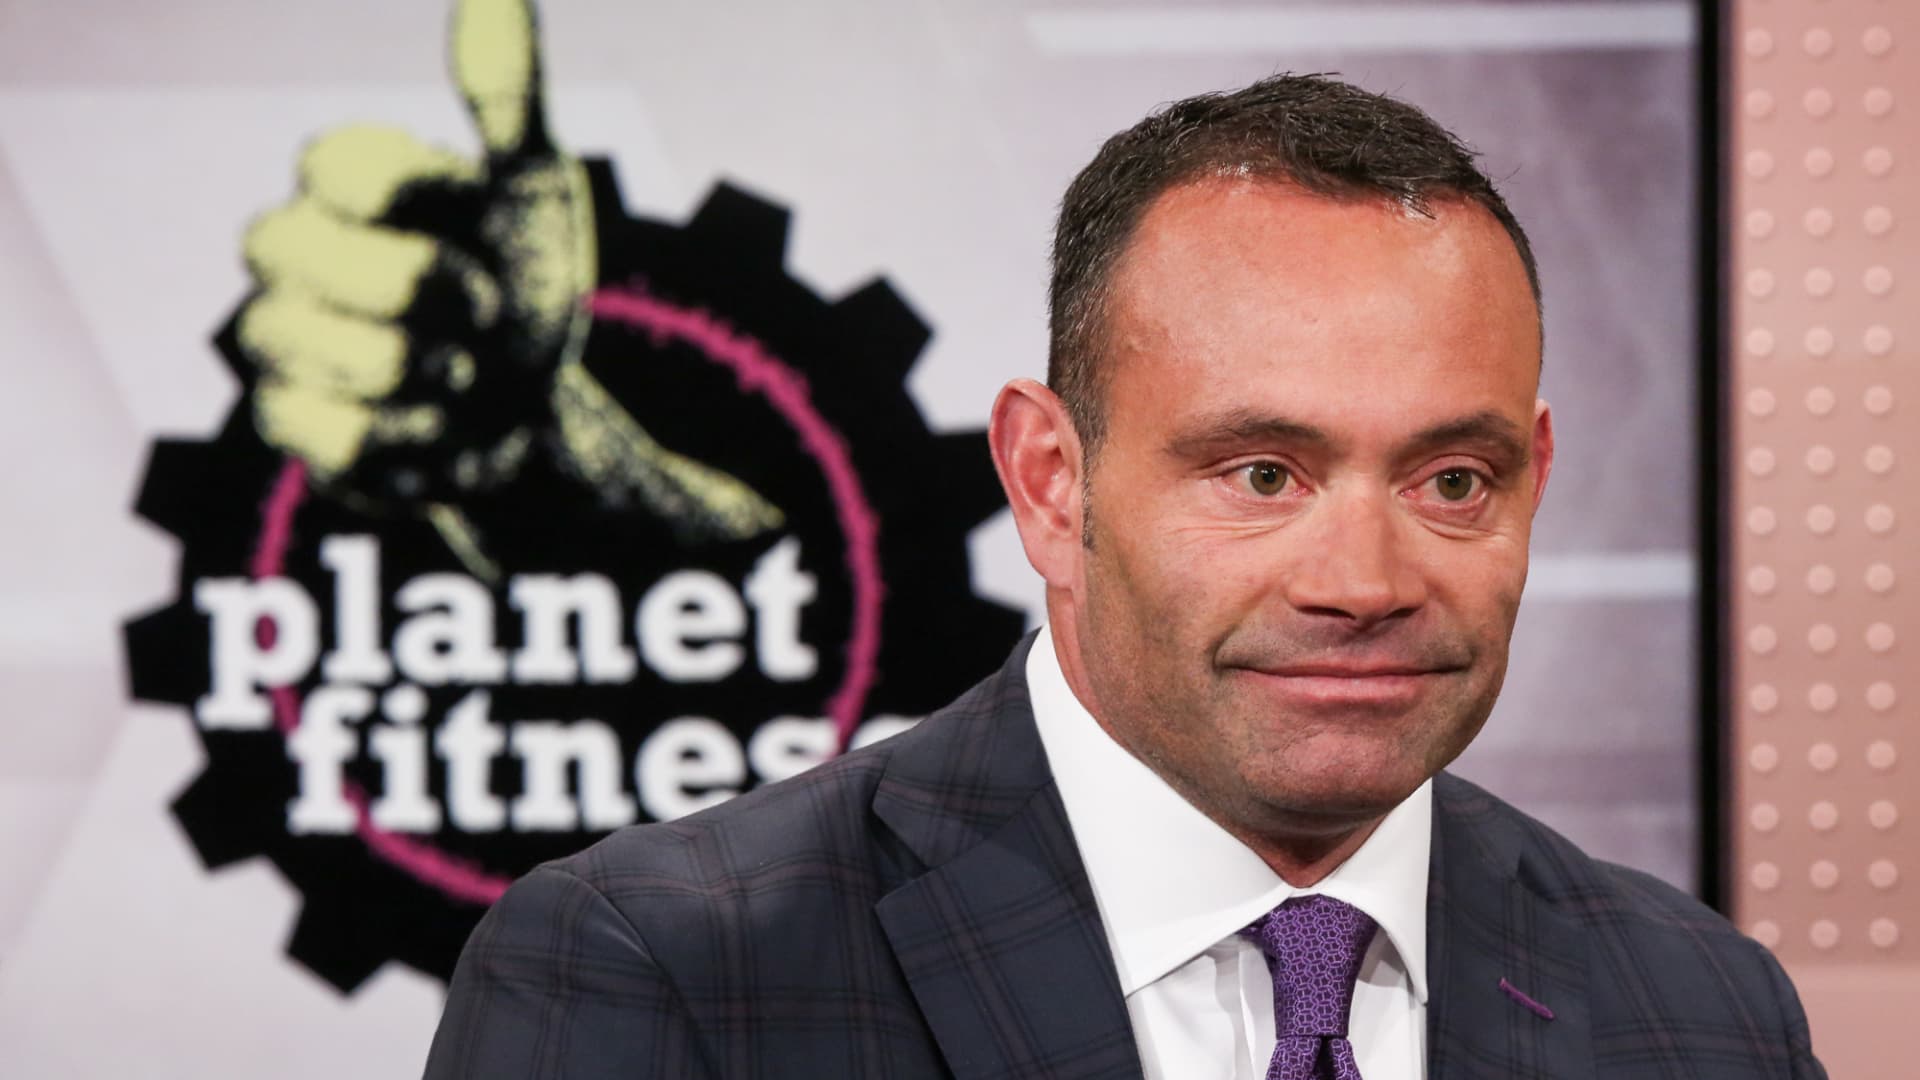 Planet Fitness shares sink after board ousts CEO in shocking move